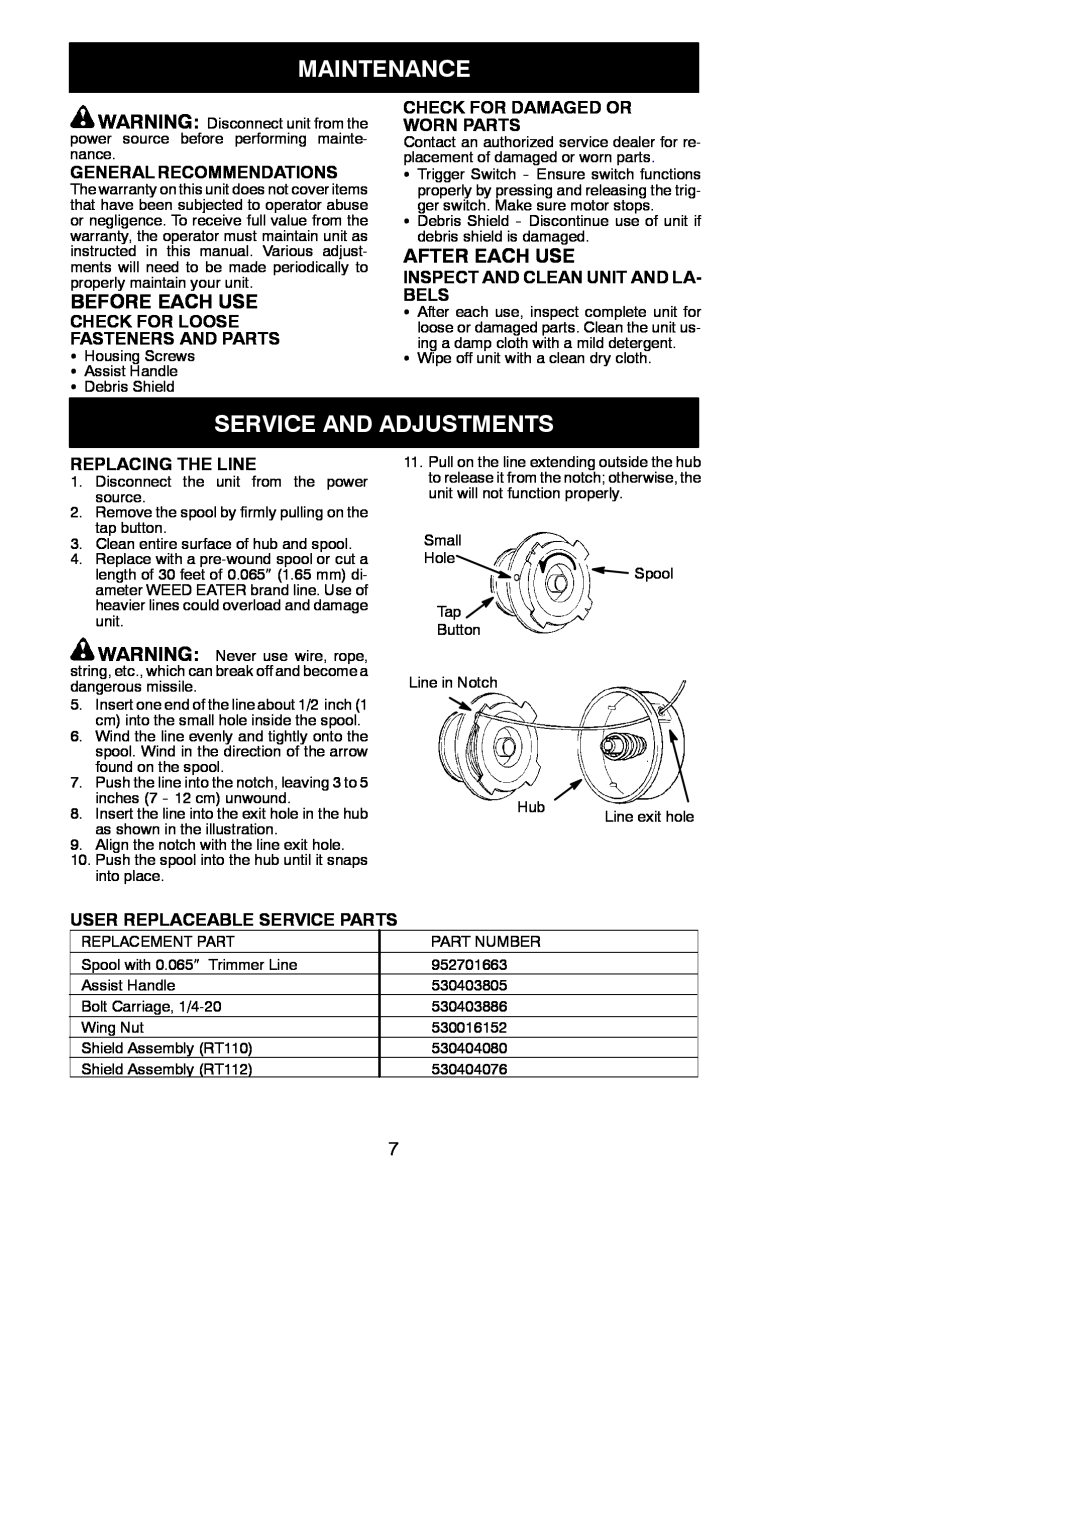 Weed Eater 545117526 instruction manual Maintenance, Service And Adjustments, Before Each Use, After Each Use 